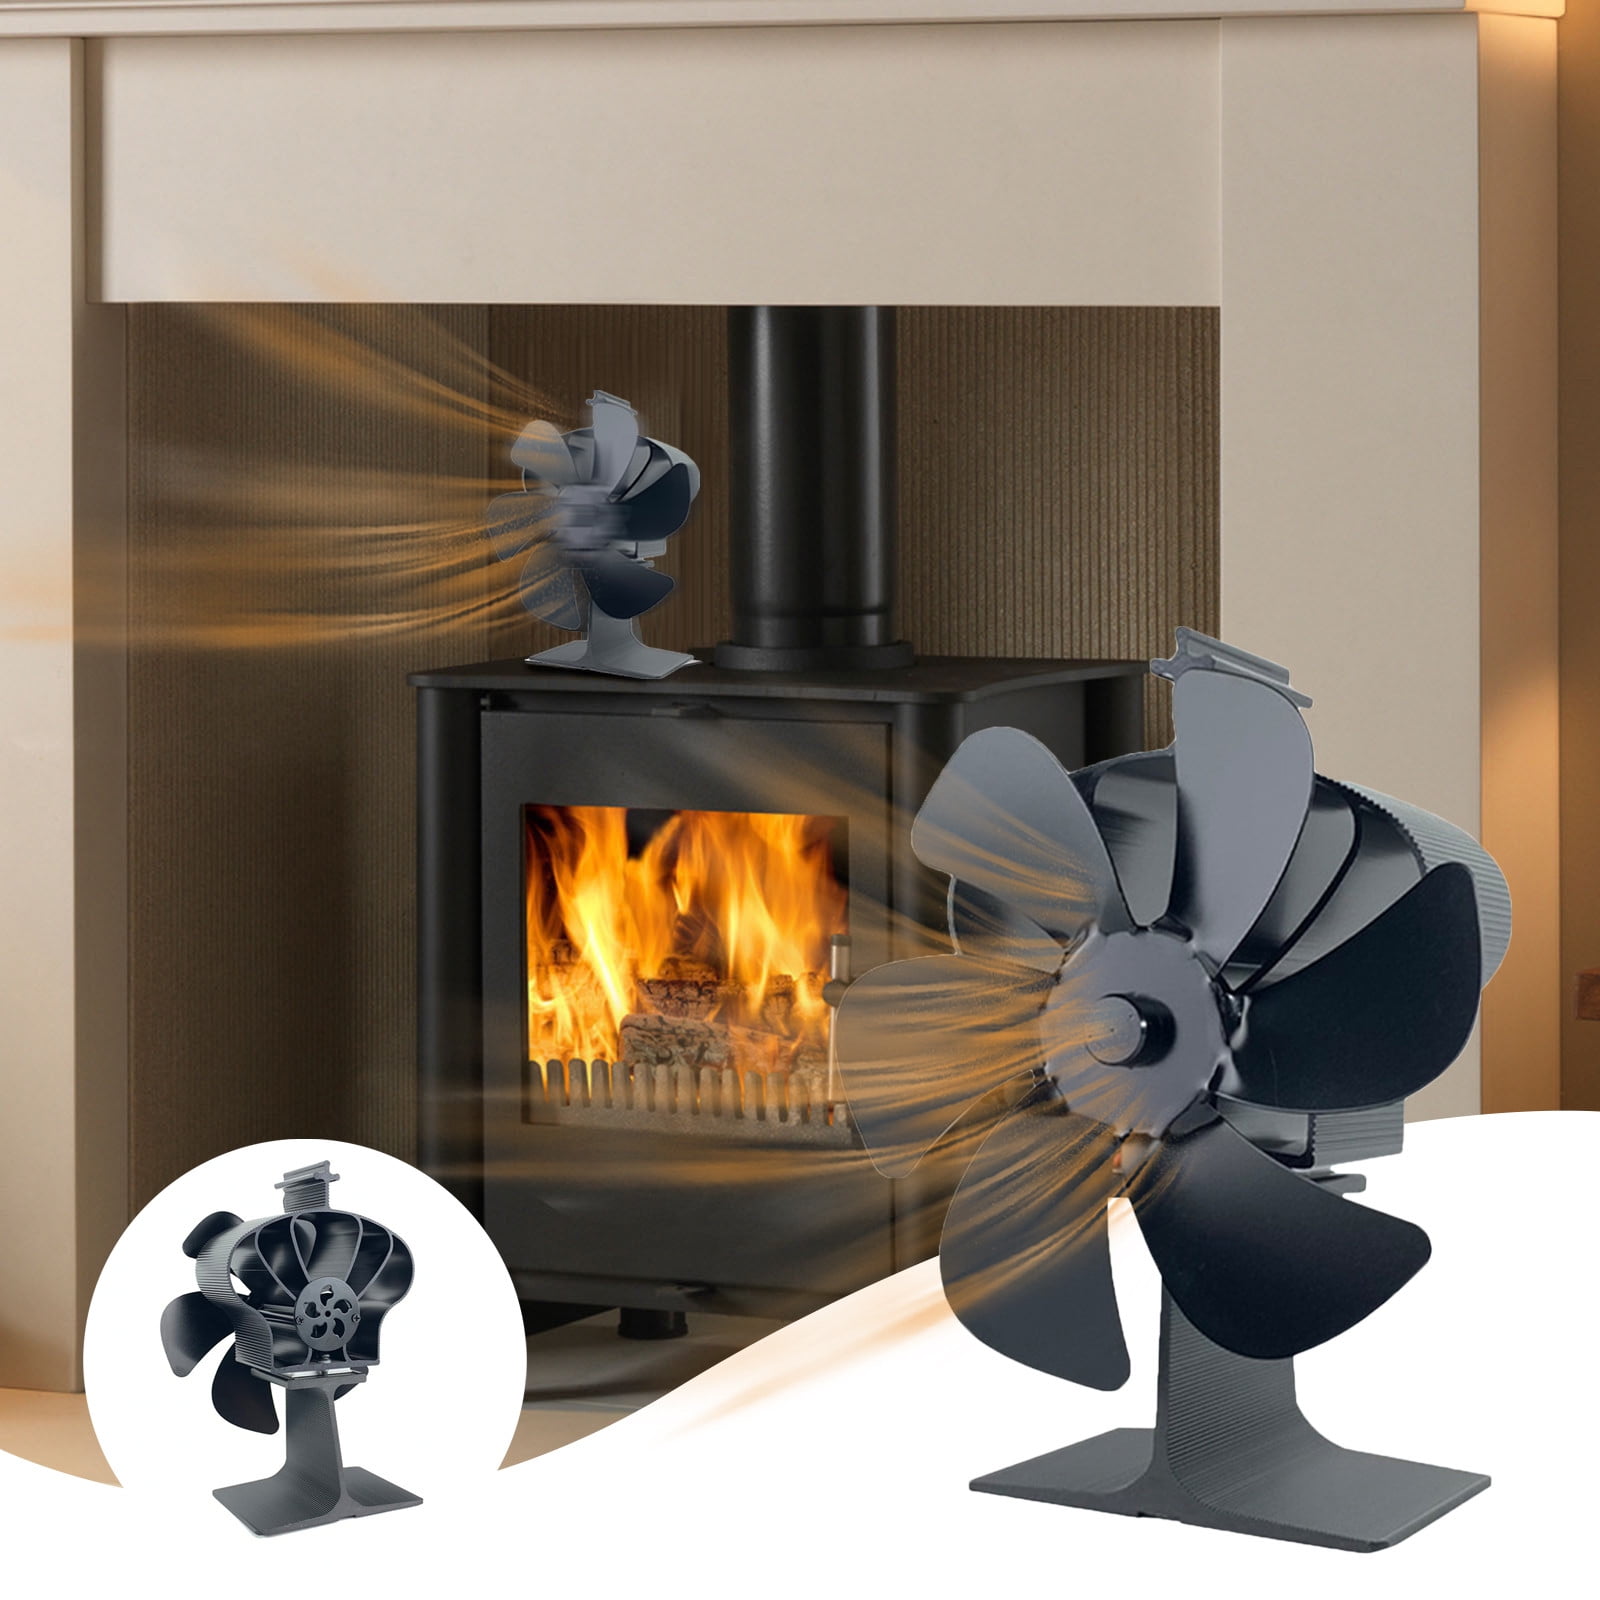 8 Blades Stove Fan, Twin Motor Double Heat Powered Fireplace Fan for Wood  Stove/Burner/Woodburning Stove Top Circulating Warm Air Saving Fuel